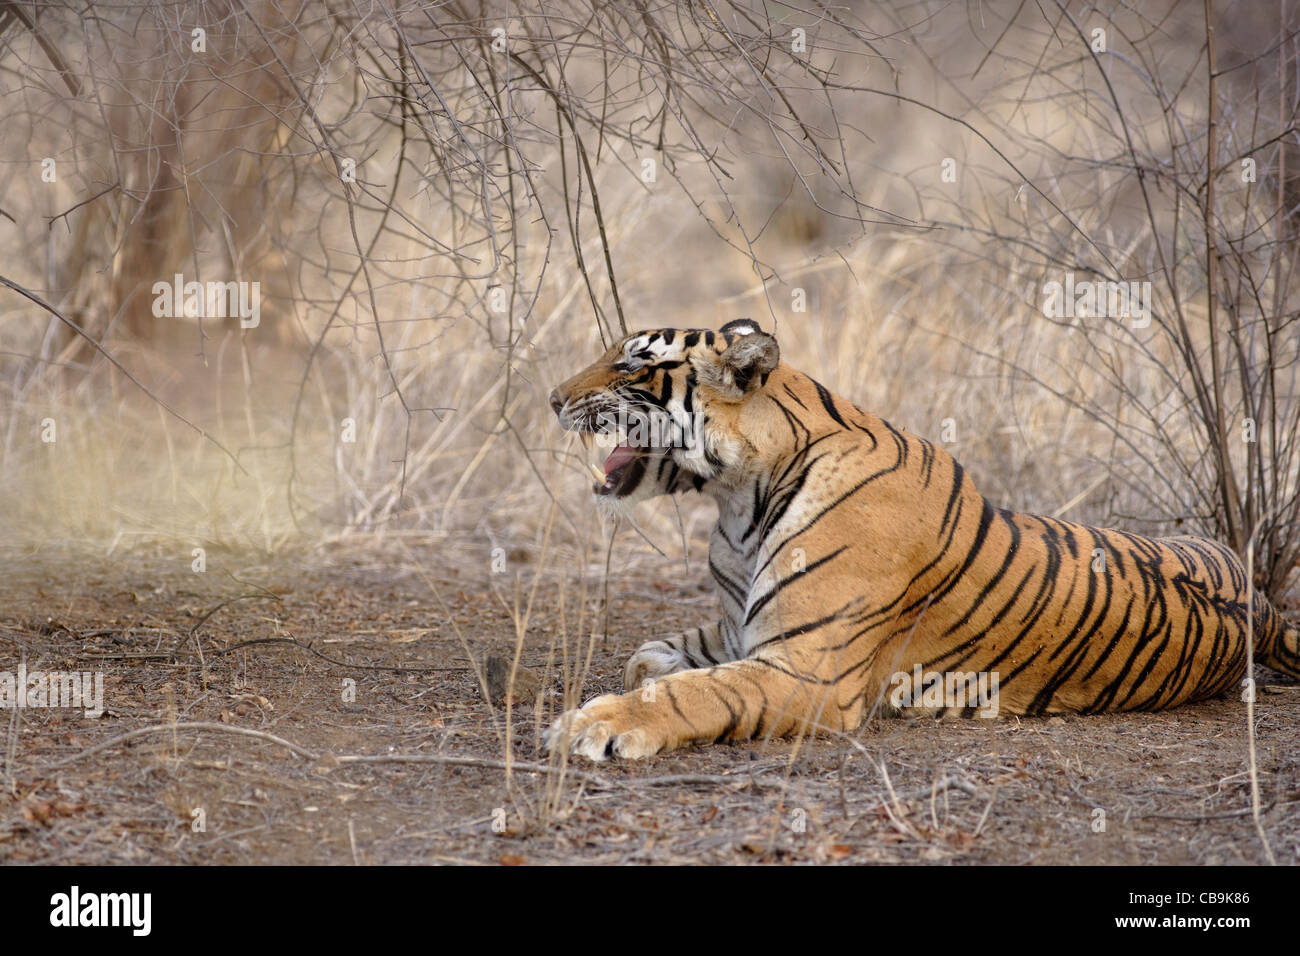 A Bengal Tiger Roaring In The Wild Forest Of Ranthambhore